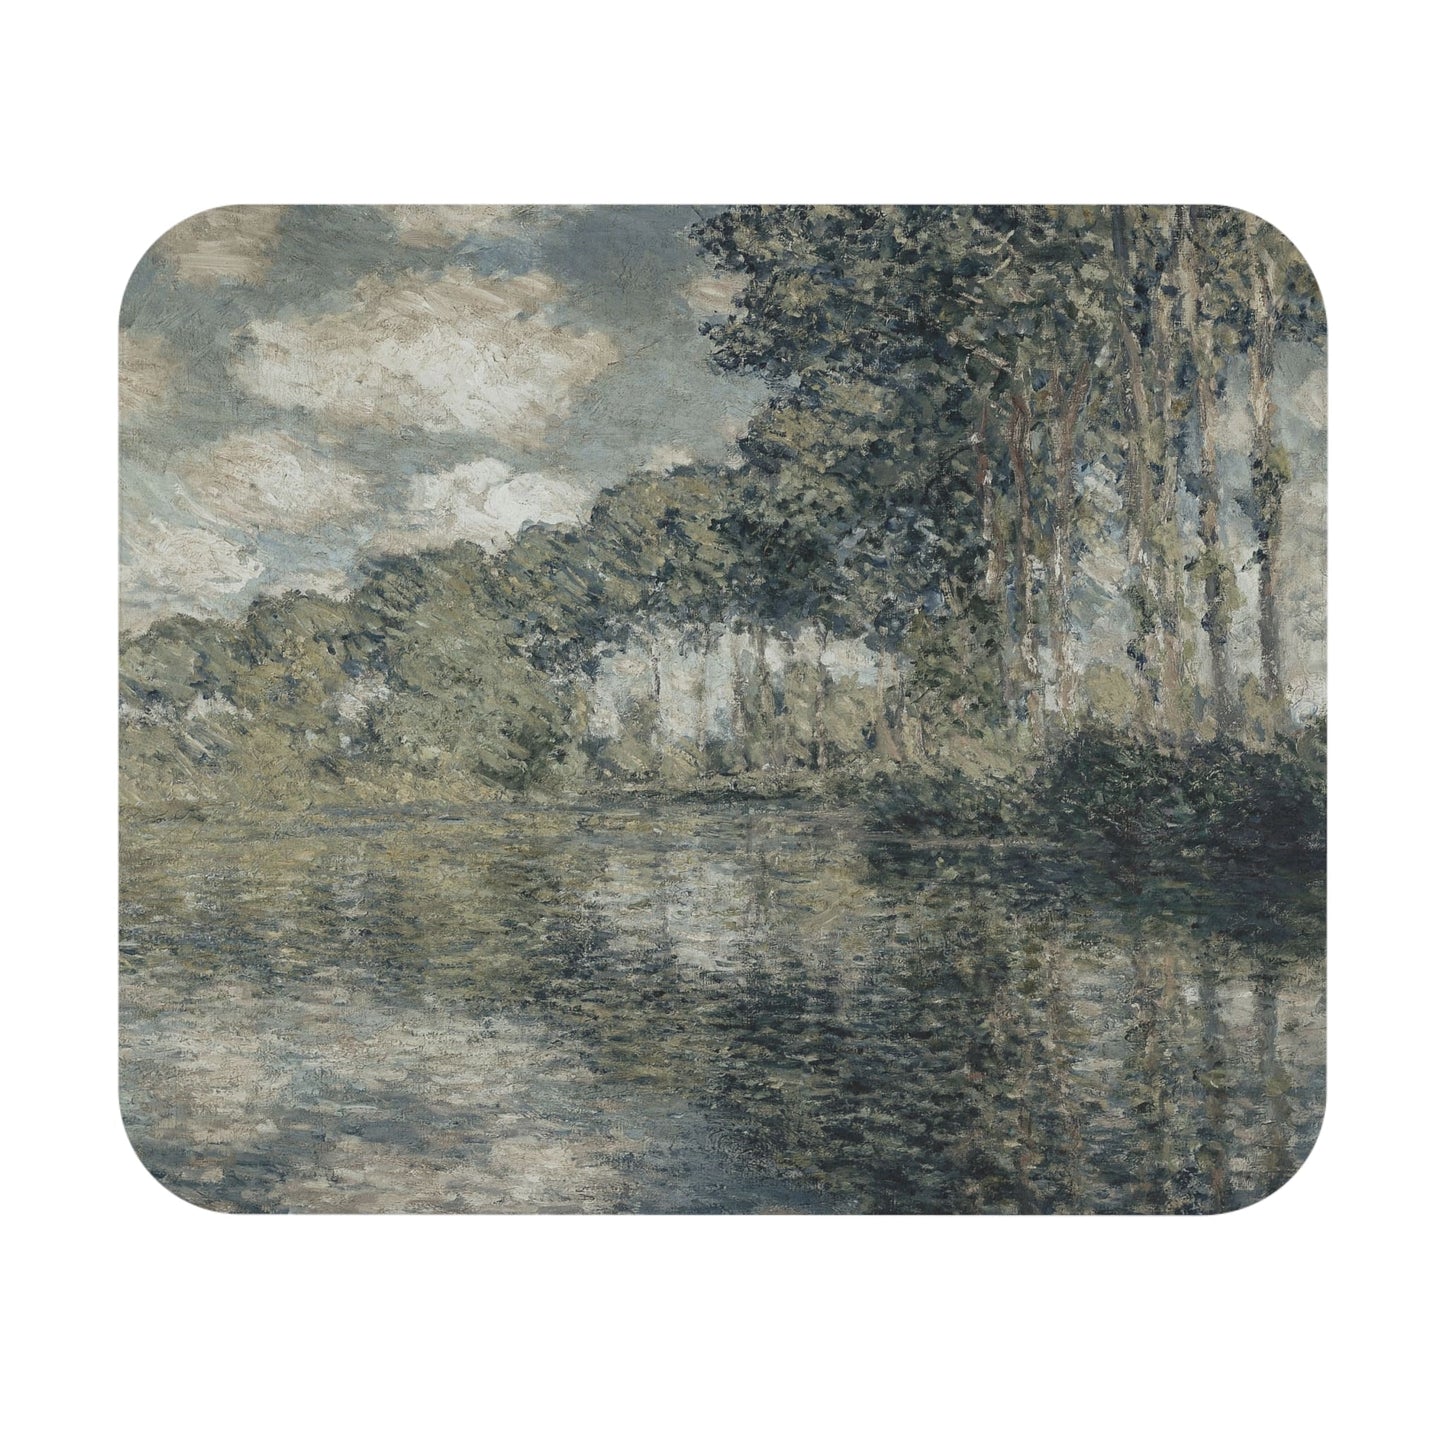 Dusty Sage Landscape Mouse Pad displaying Claude Monet tranquil scenes, perfect for desk and office decor.